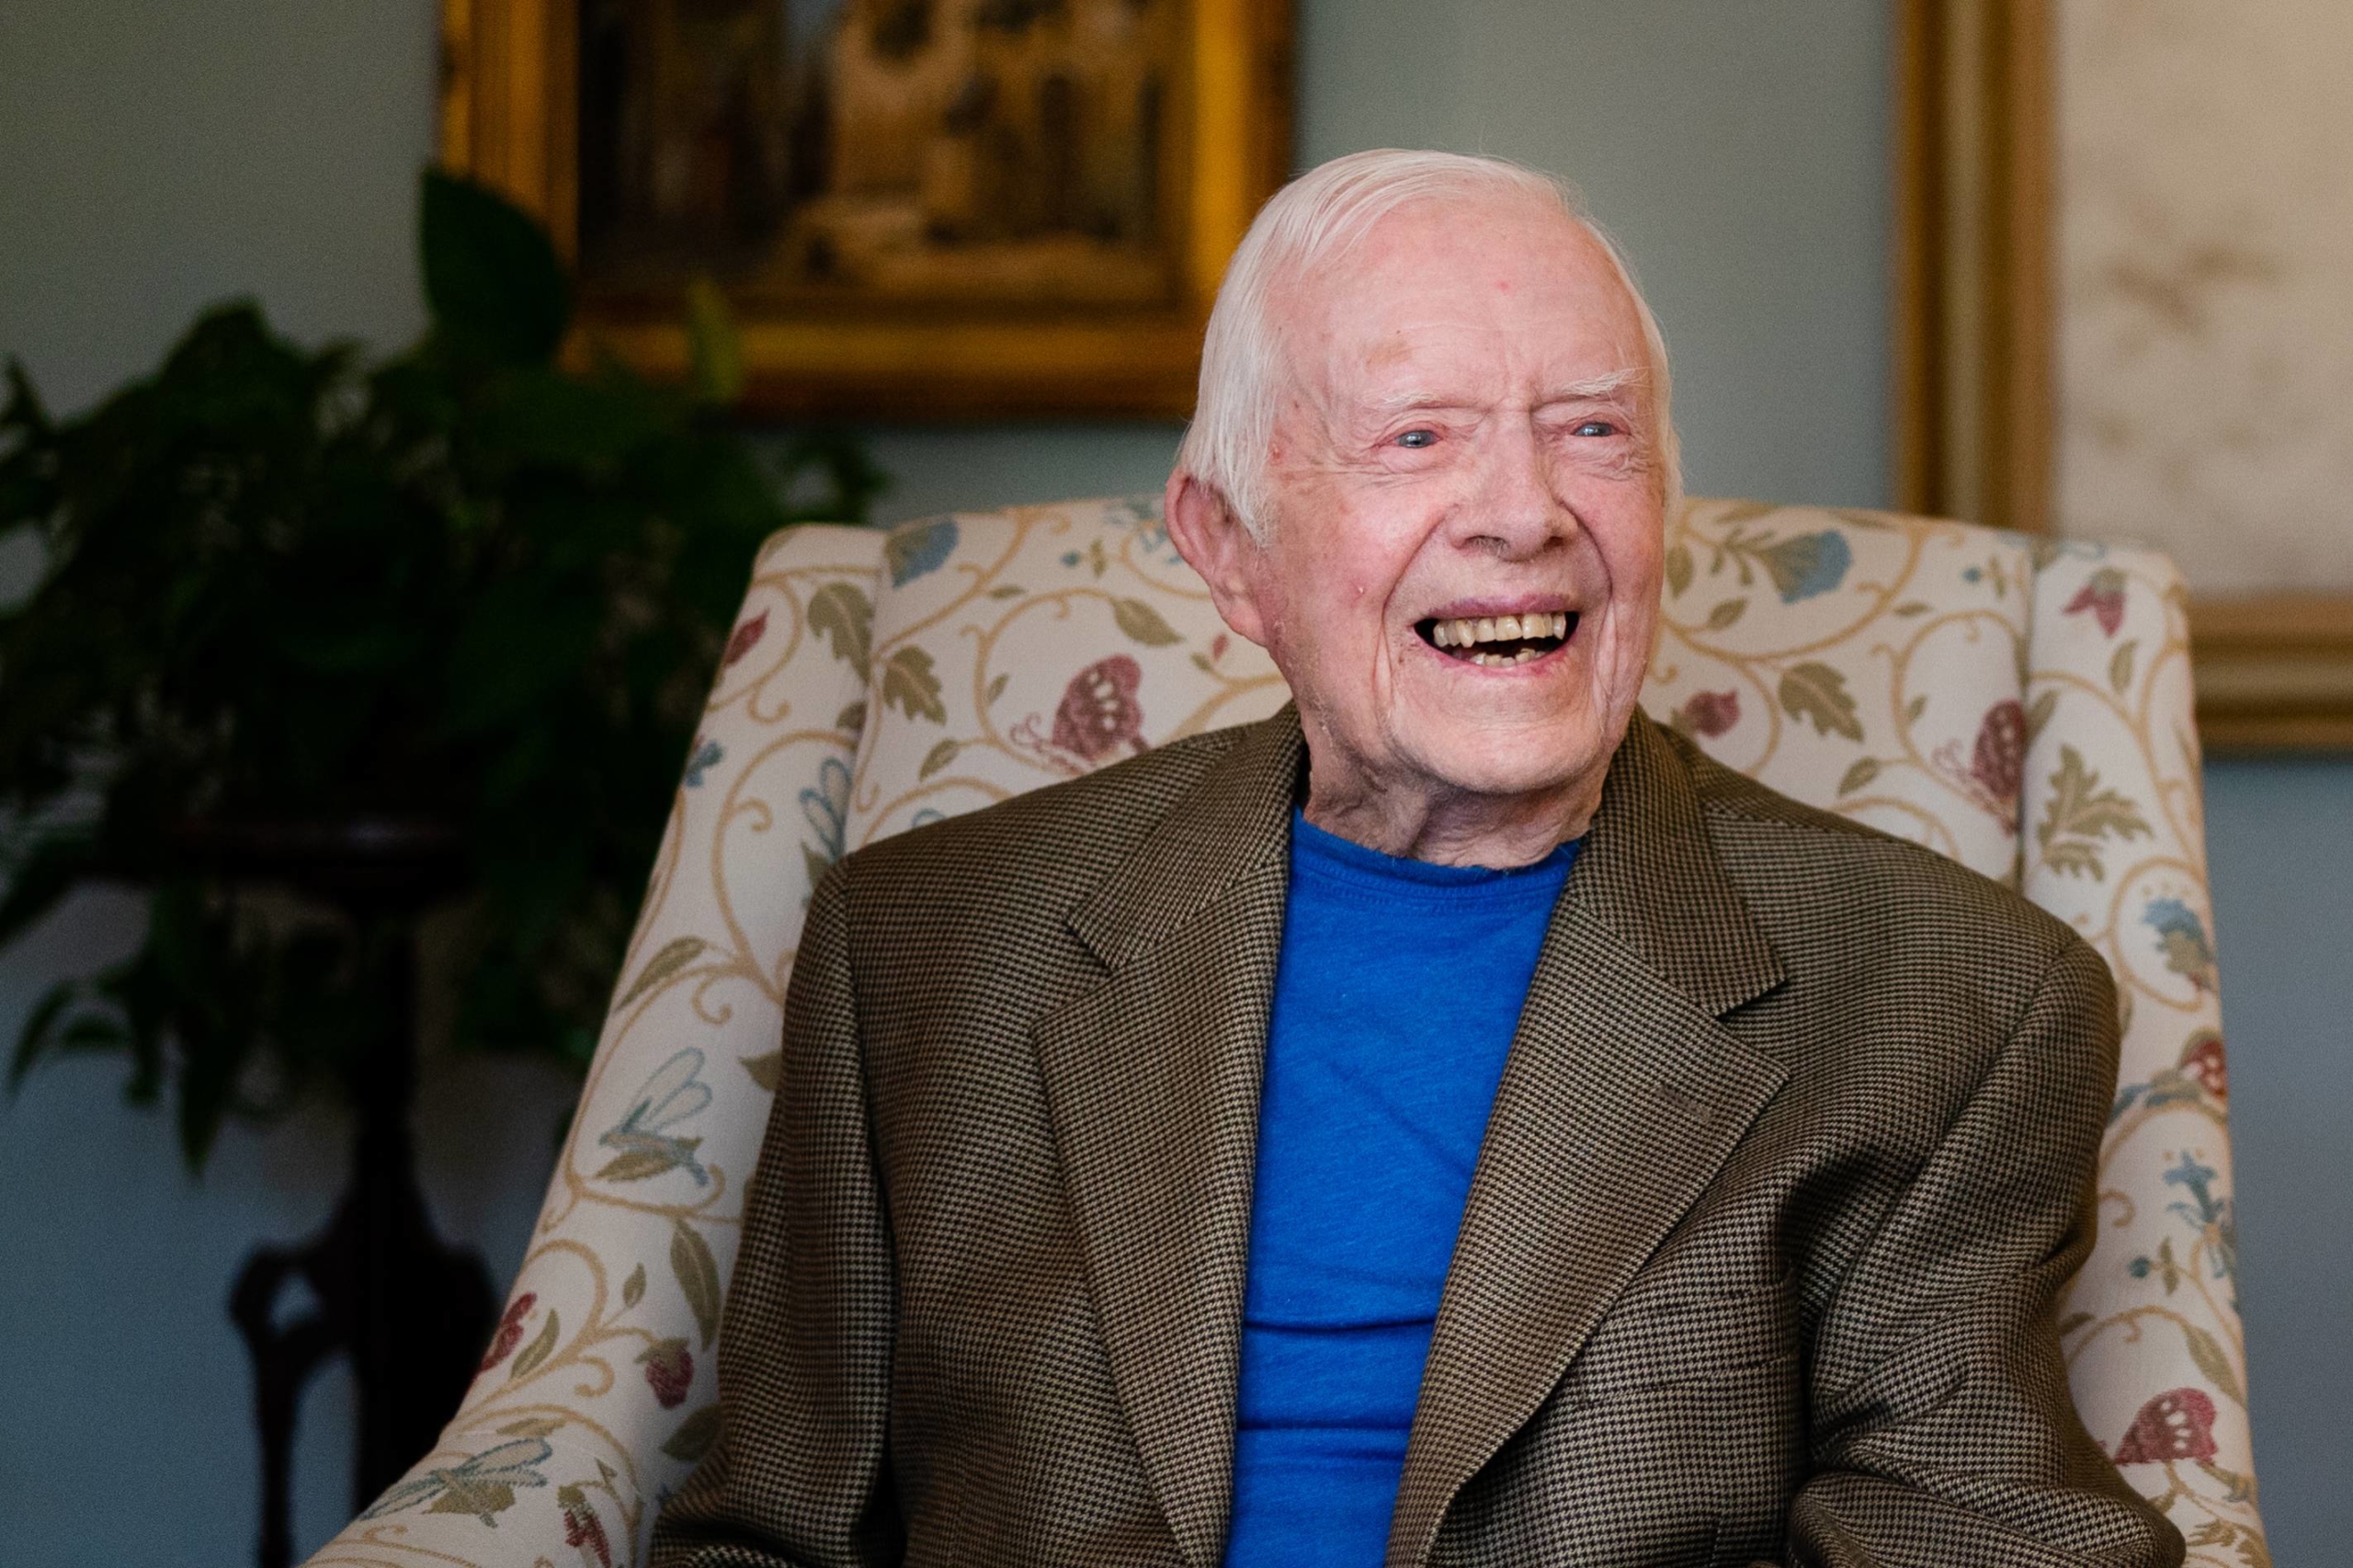 What Happened To Jimmy Carter: Is He Dying From Cancer?